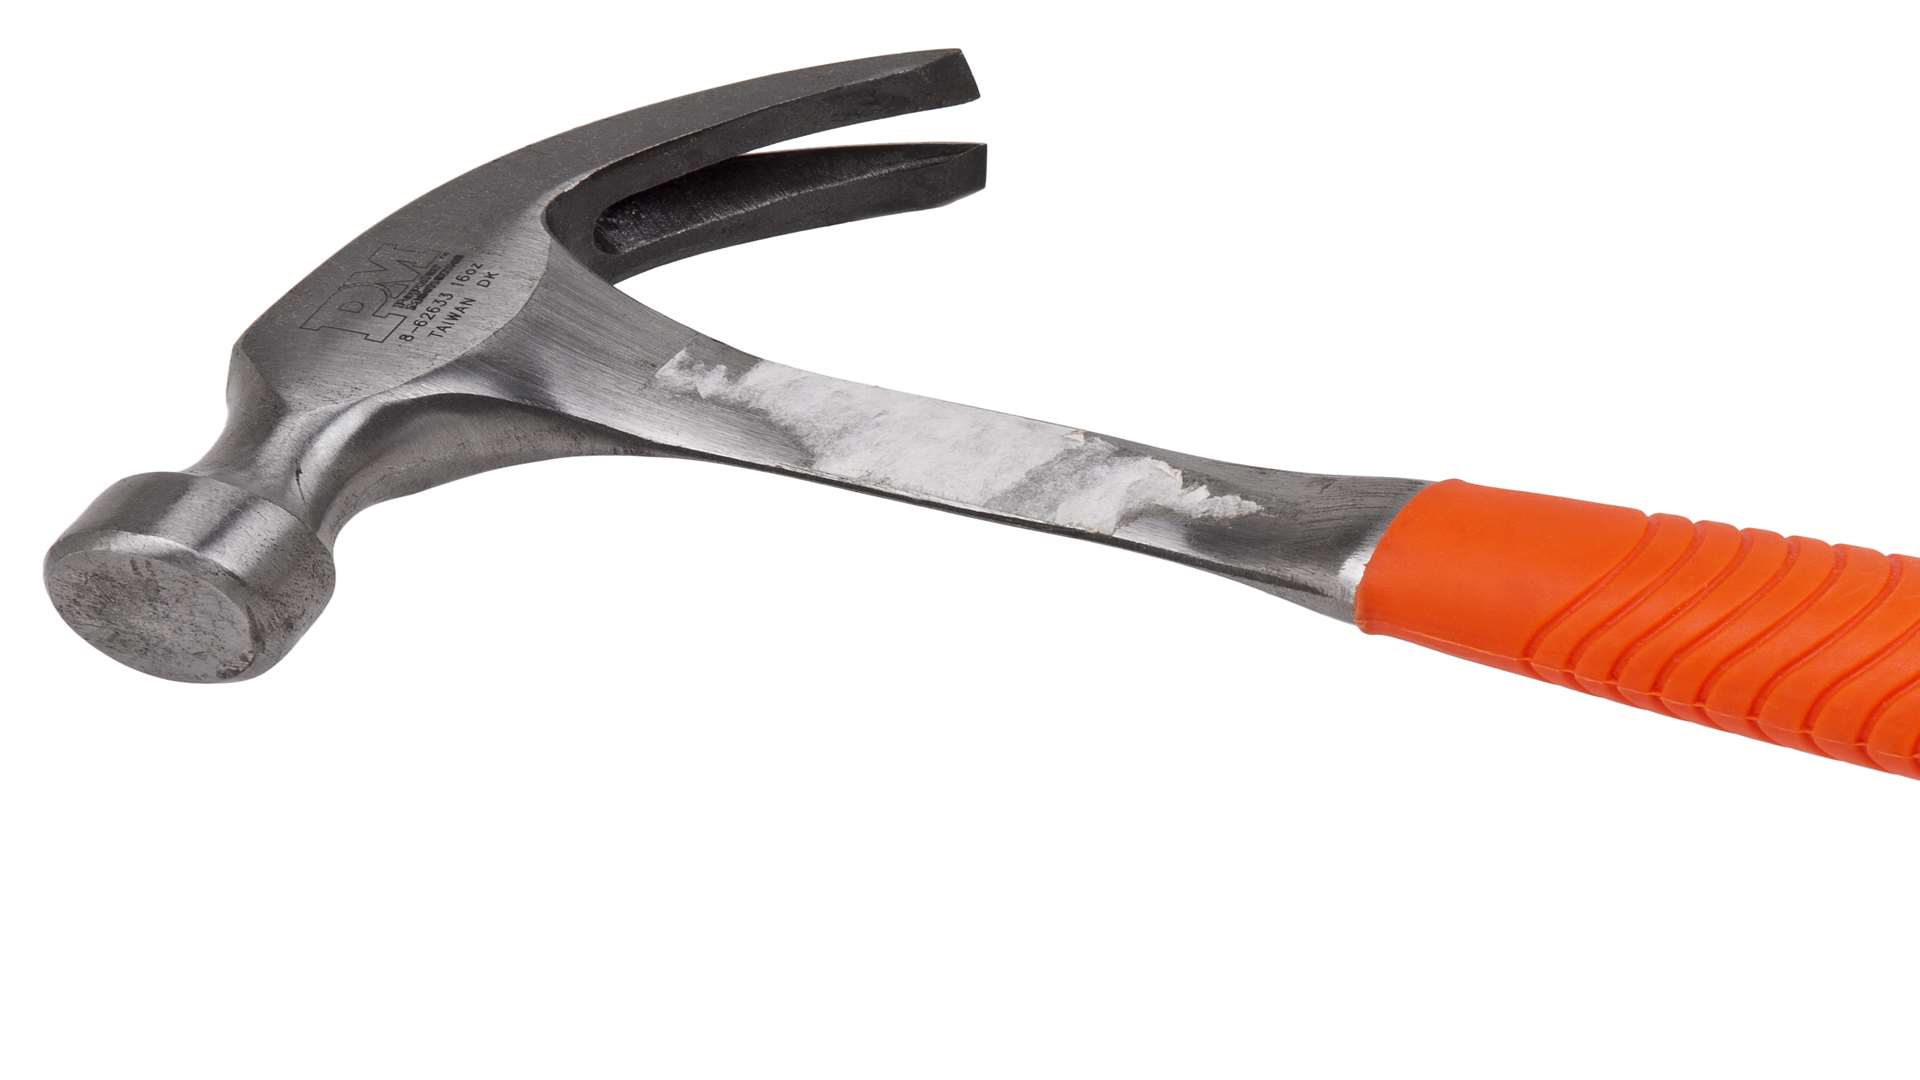 A claw hammer. Stock image